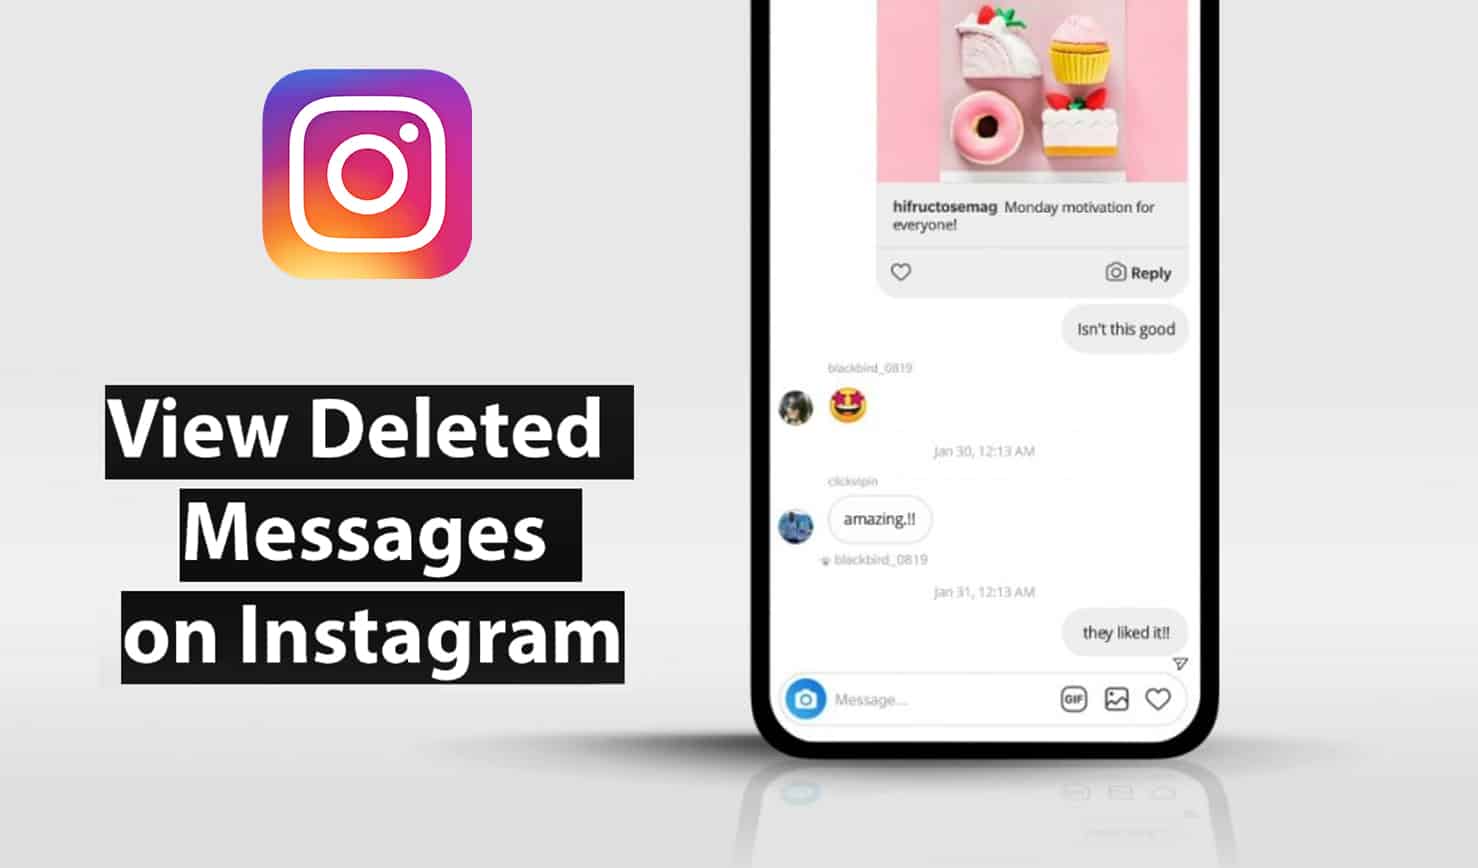 How to View Deleted Messages (Unsend) on Instagram in 30